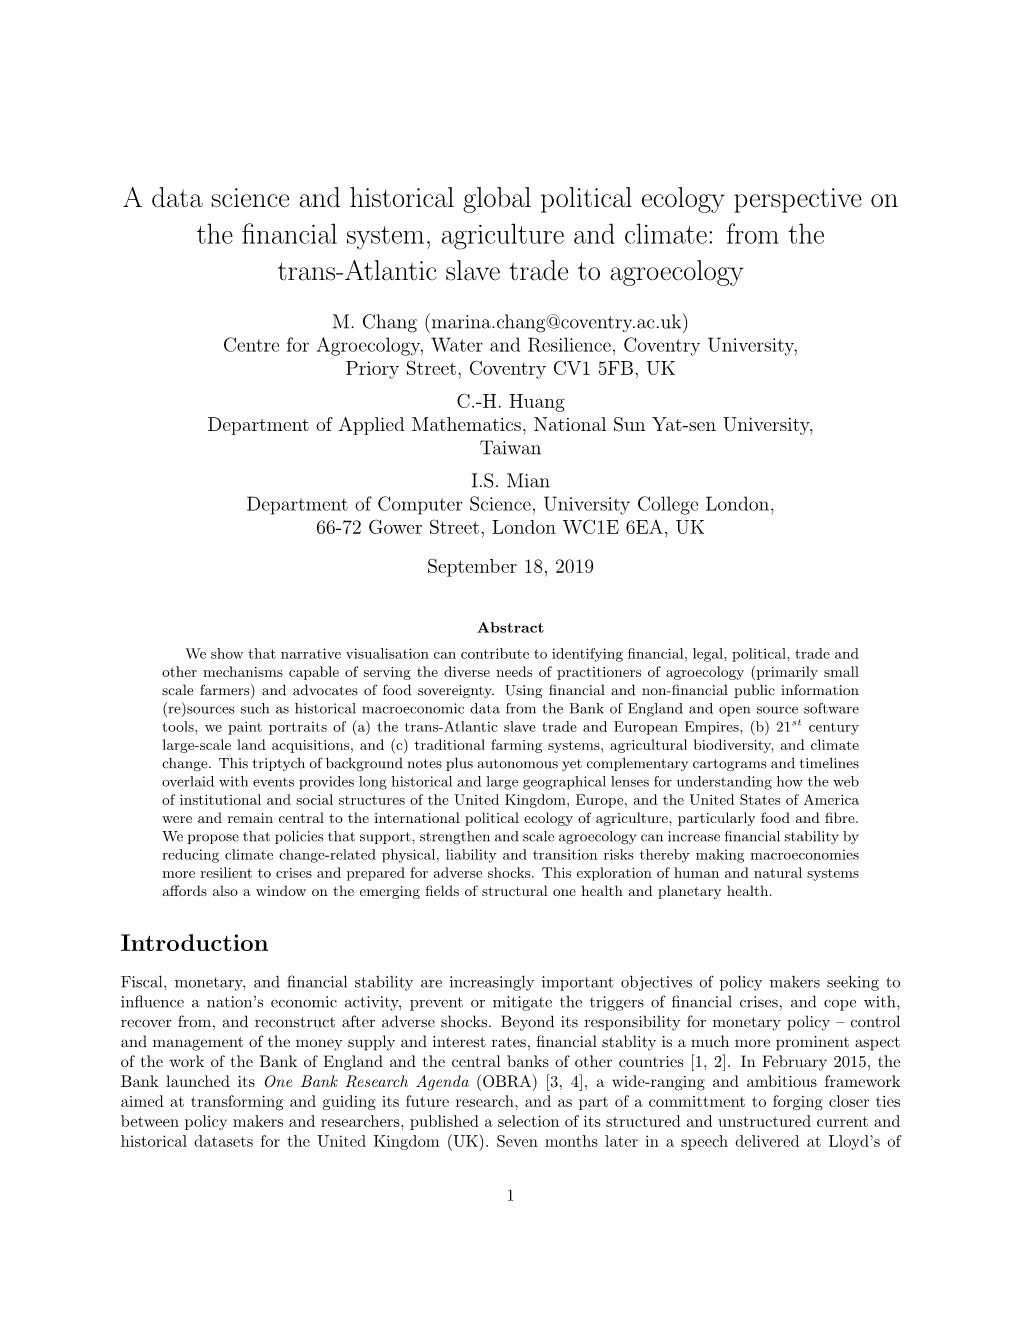 A Data Science and Historical Global Political Ecology Perspective on the ﬁnancial System, Agriculture and Climate: from the Trans-Atlantic Slave Trade to Agroecology